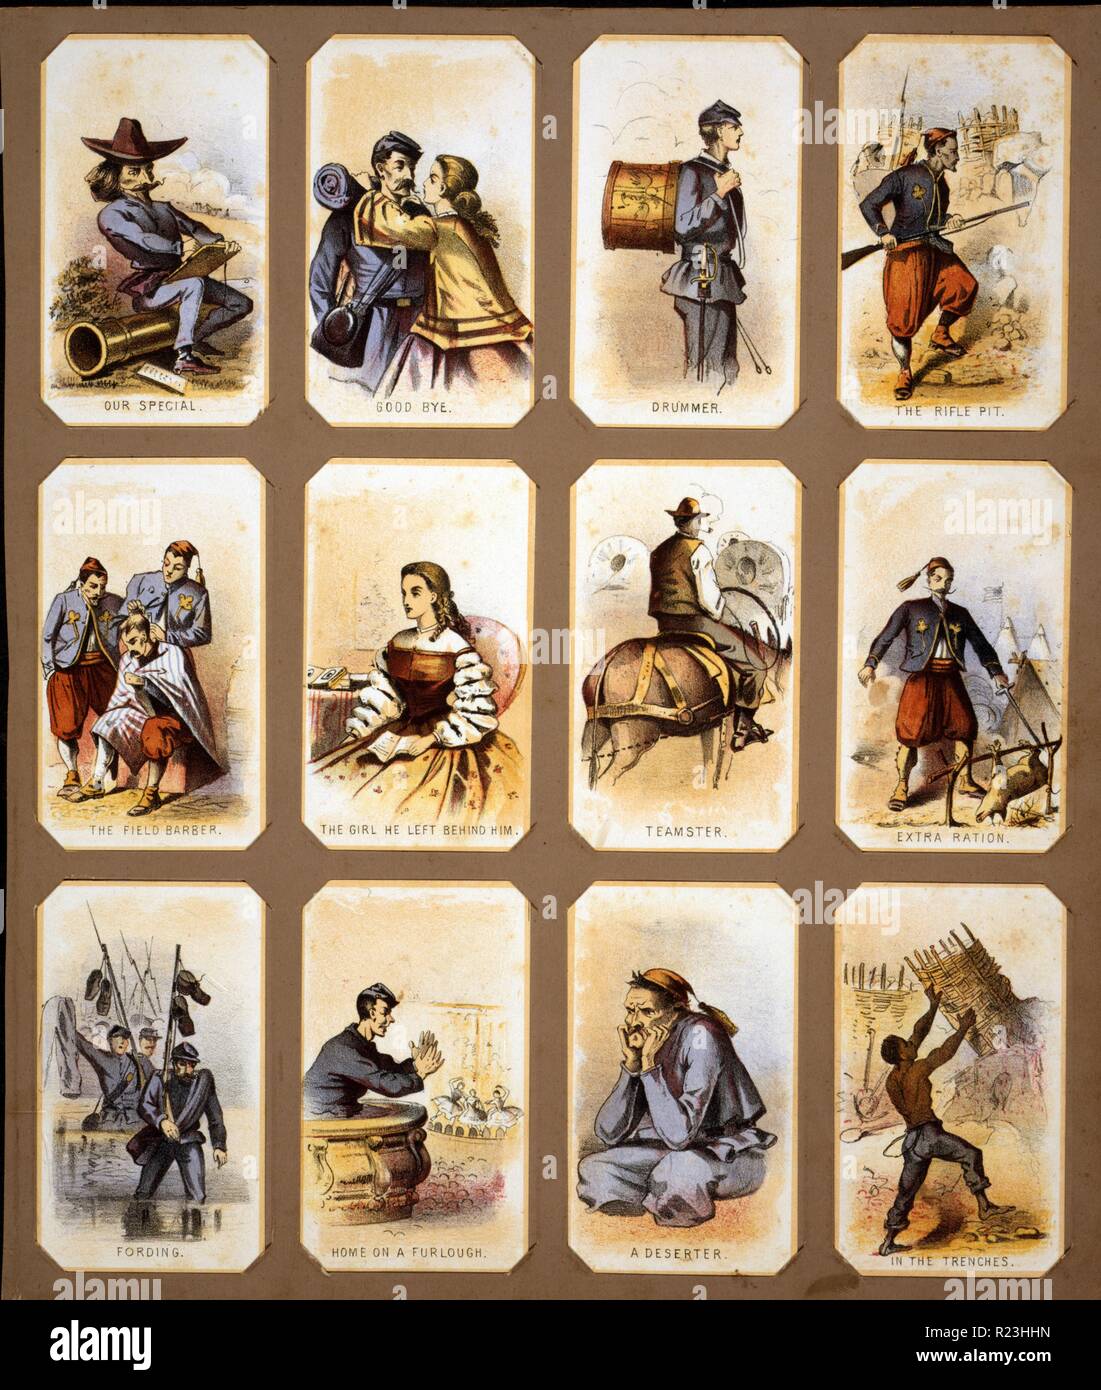 Life in camp, part 2. Souvenir cards showing the various views of the daily life of Union soldiers during the Civil War. 1861-1865 Stock Photo